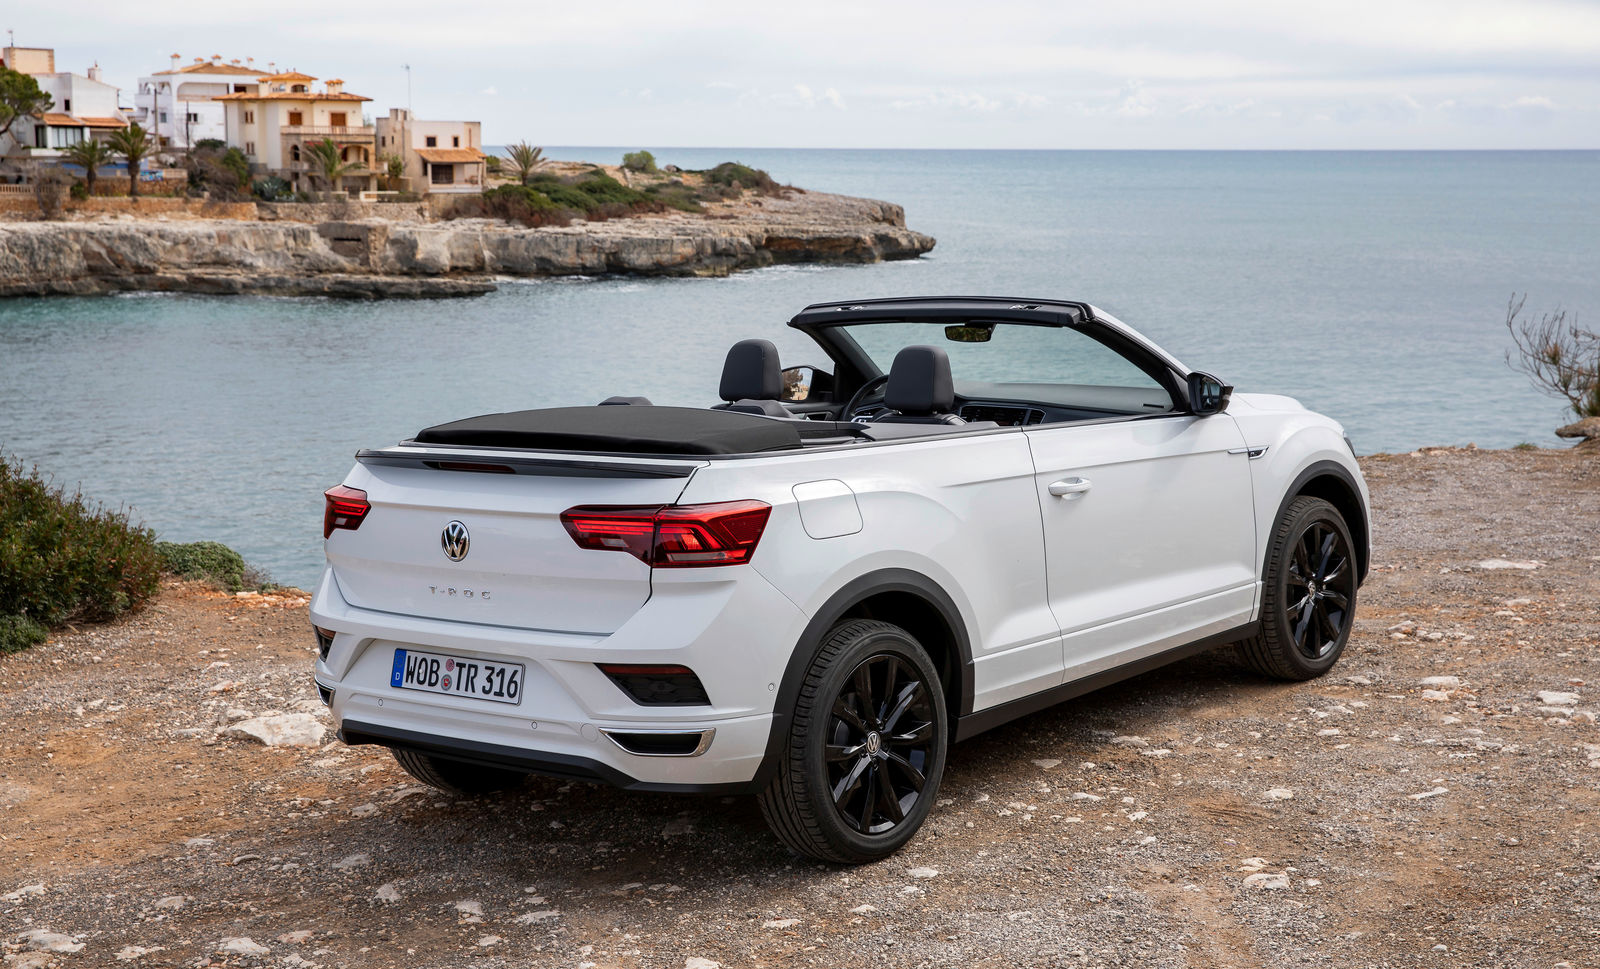 The new T-Roc Cabriolet